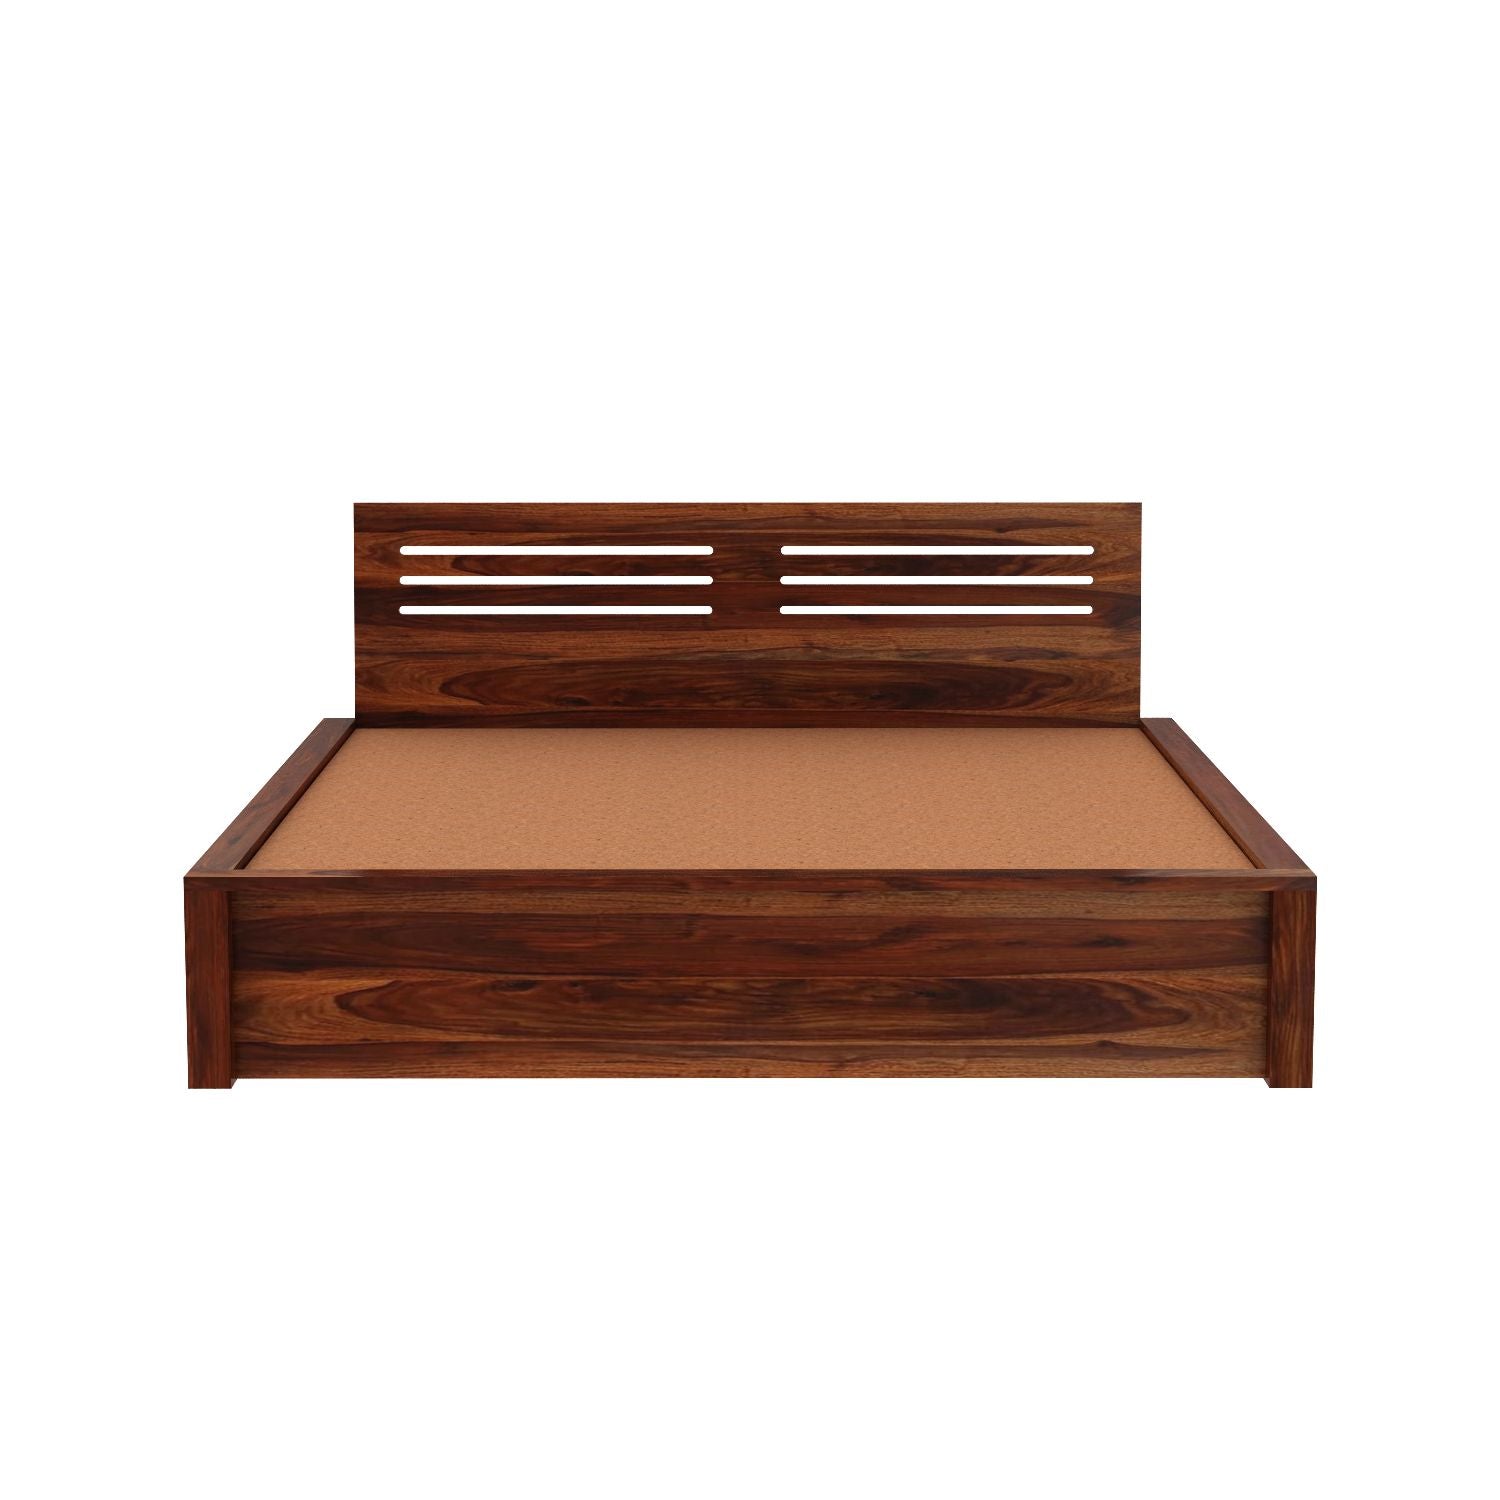 Due Solid Sheesham Wood Hydraulic Bed With Box Storage (Queen Size, Natural Finish)